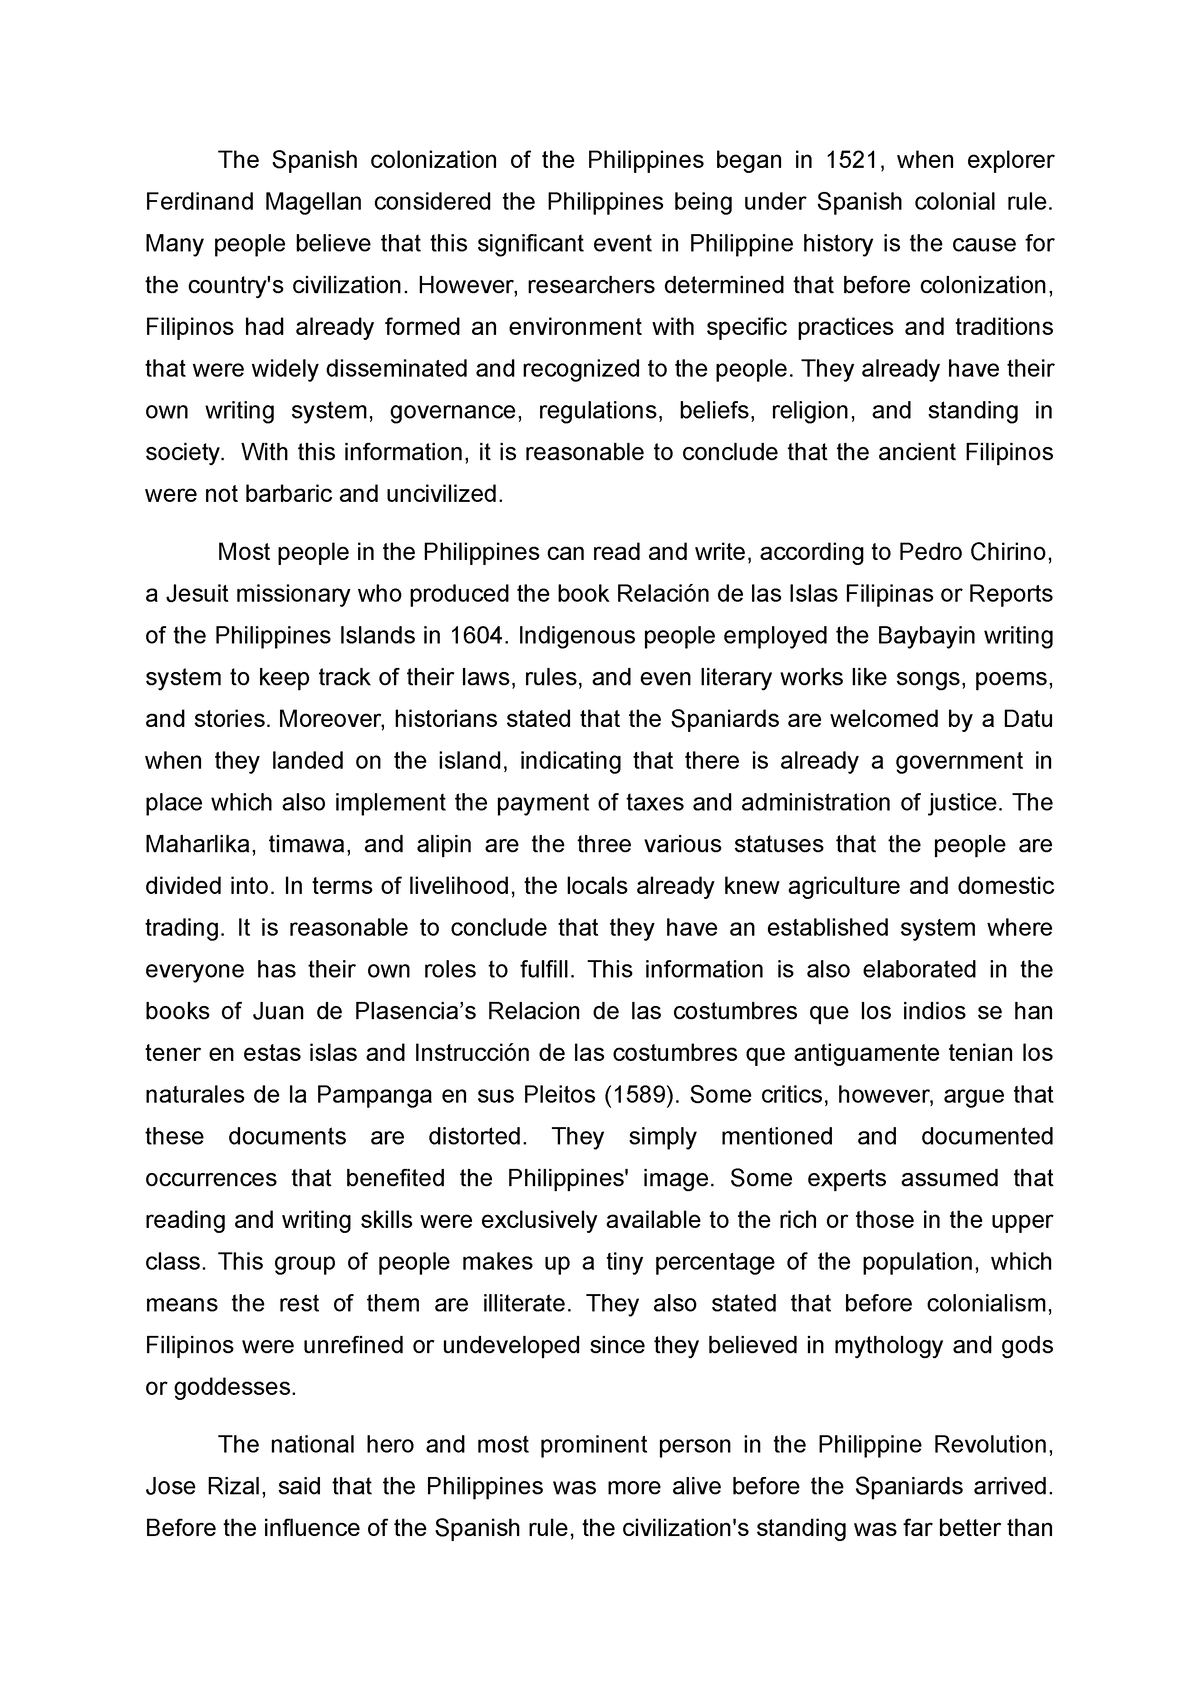 federalism in the philippines essay